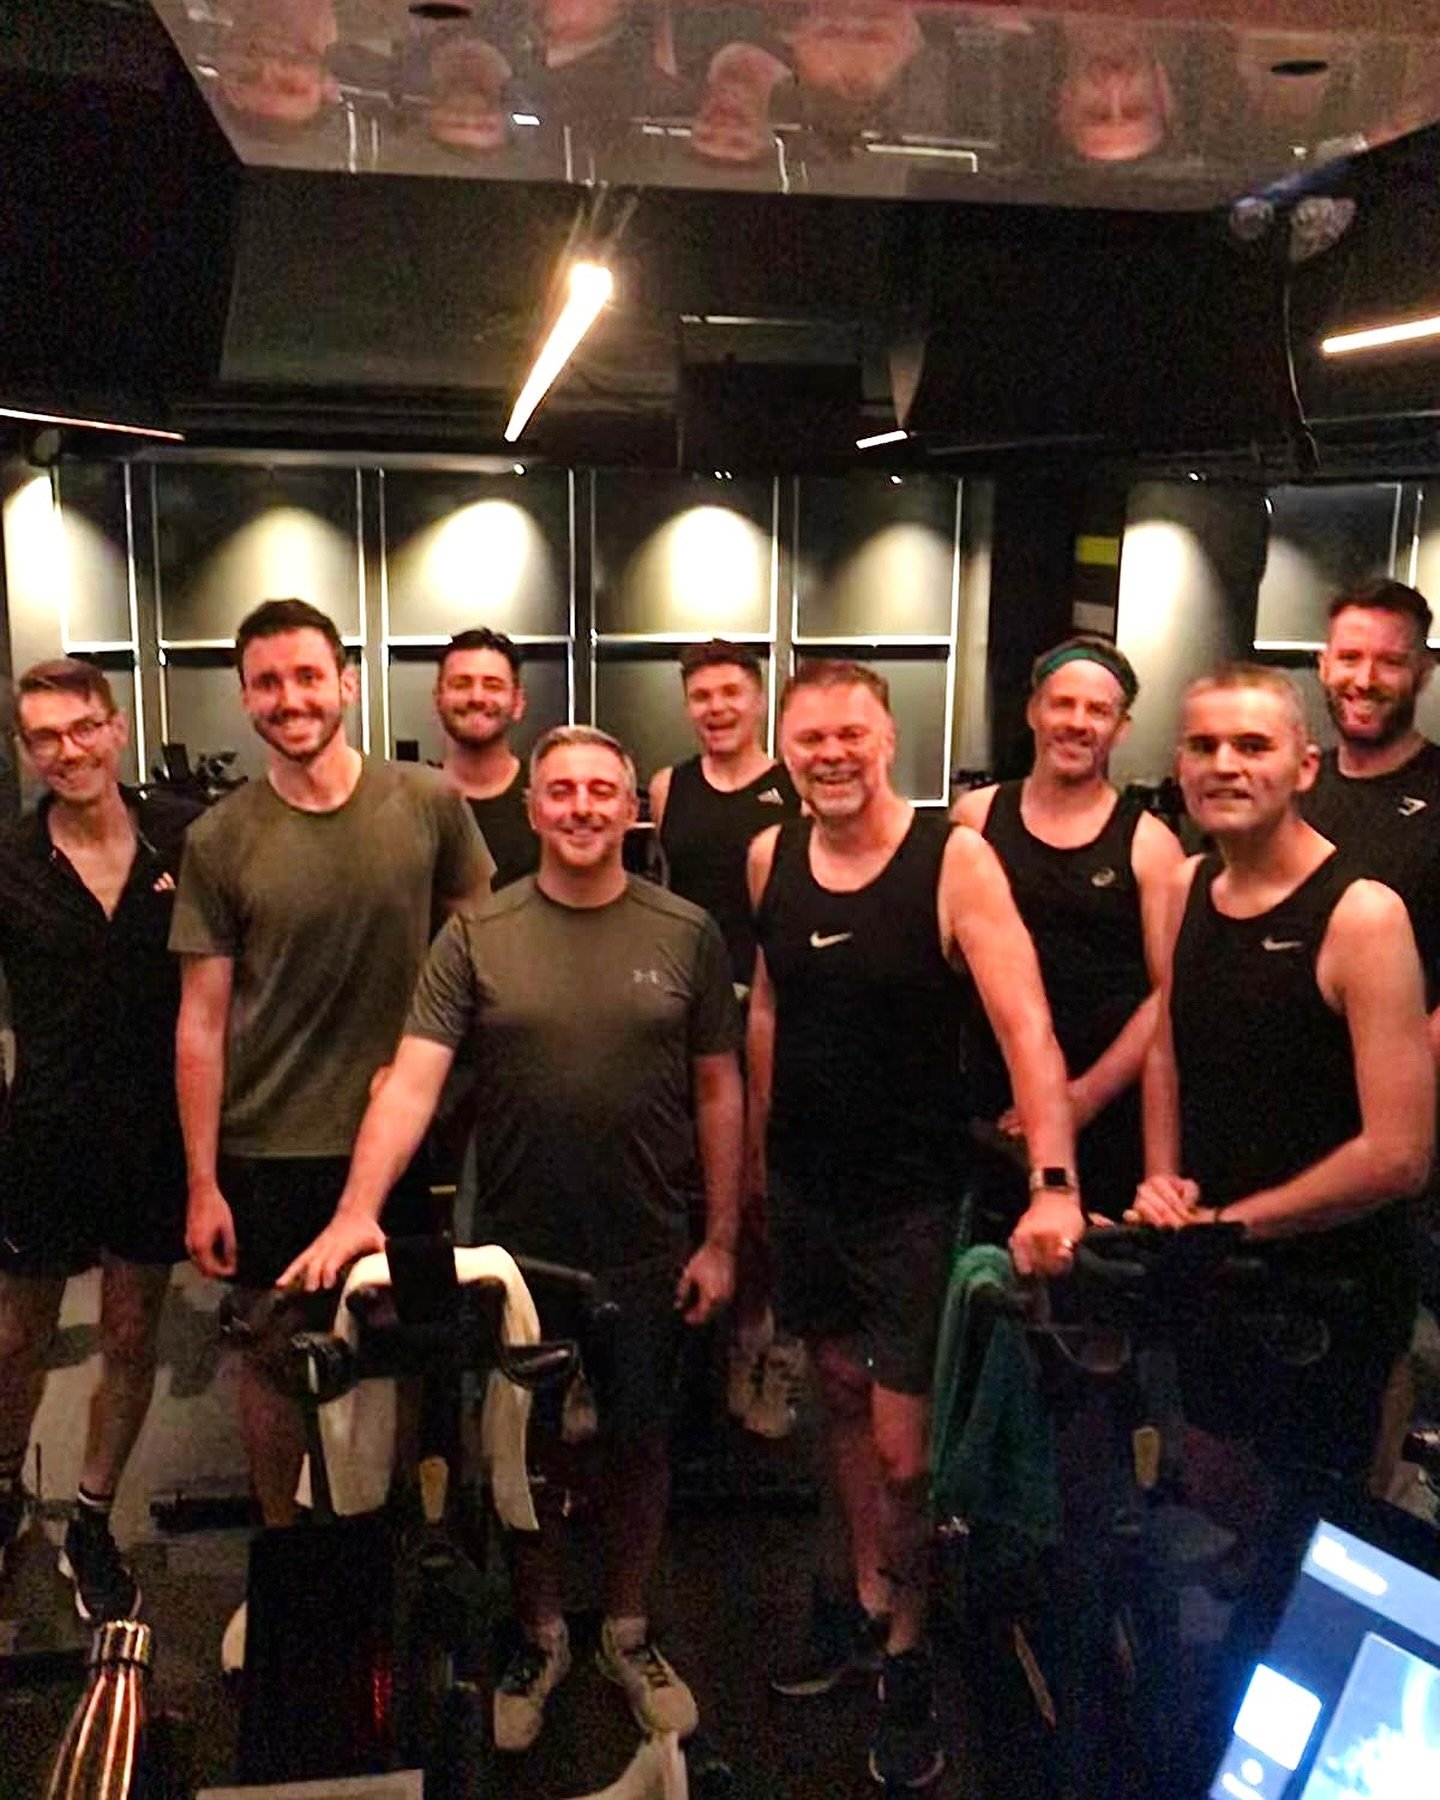 🎶🎤🎹 Eurovision Part 2 with Daniel was FULL of bops including an @ollyalexanderr Dizzy dance break! 🇬🇧 Amazing work team, and see you with a slightly sore head on Monday! #eurovision #spinder #spinclub #spinstudio #lgbtfitness #gayuk #gaylondon #